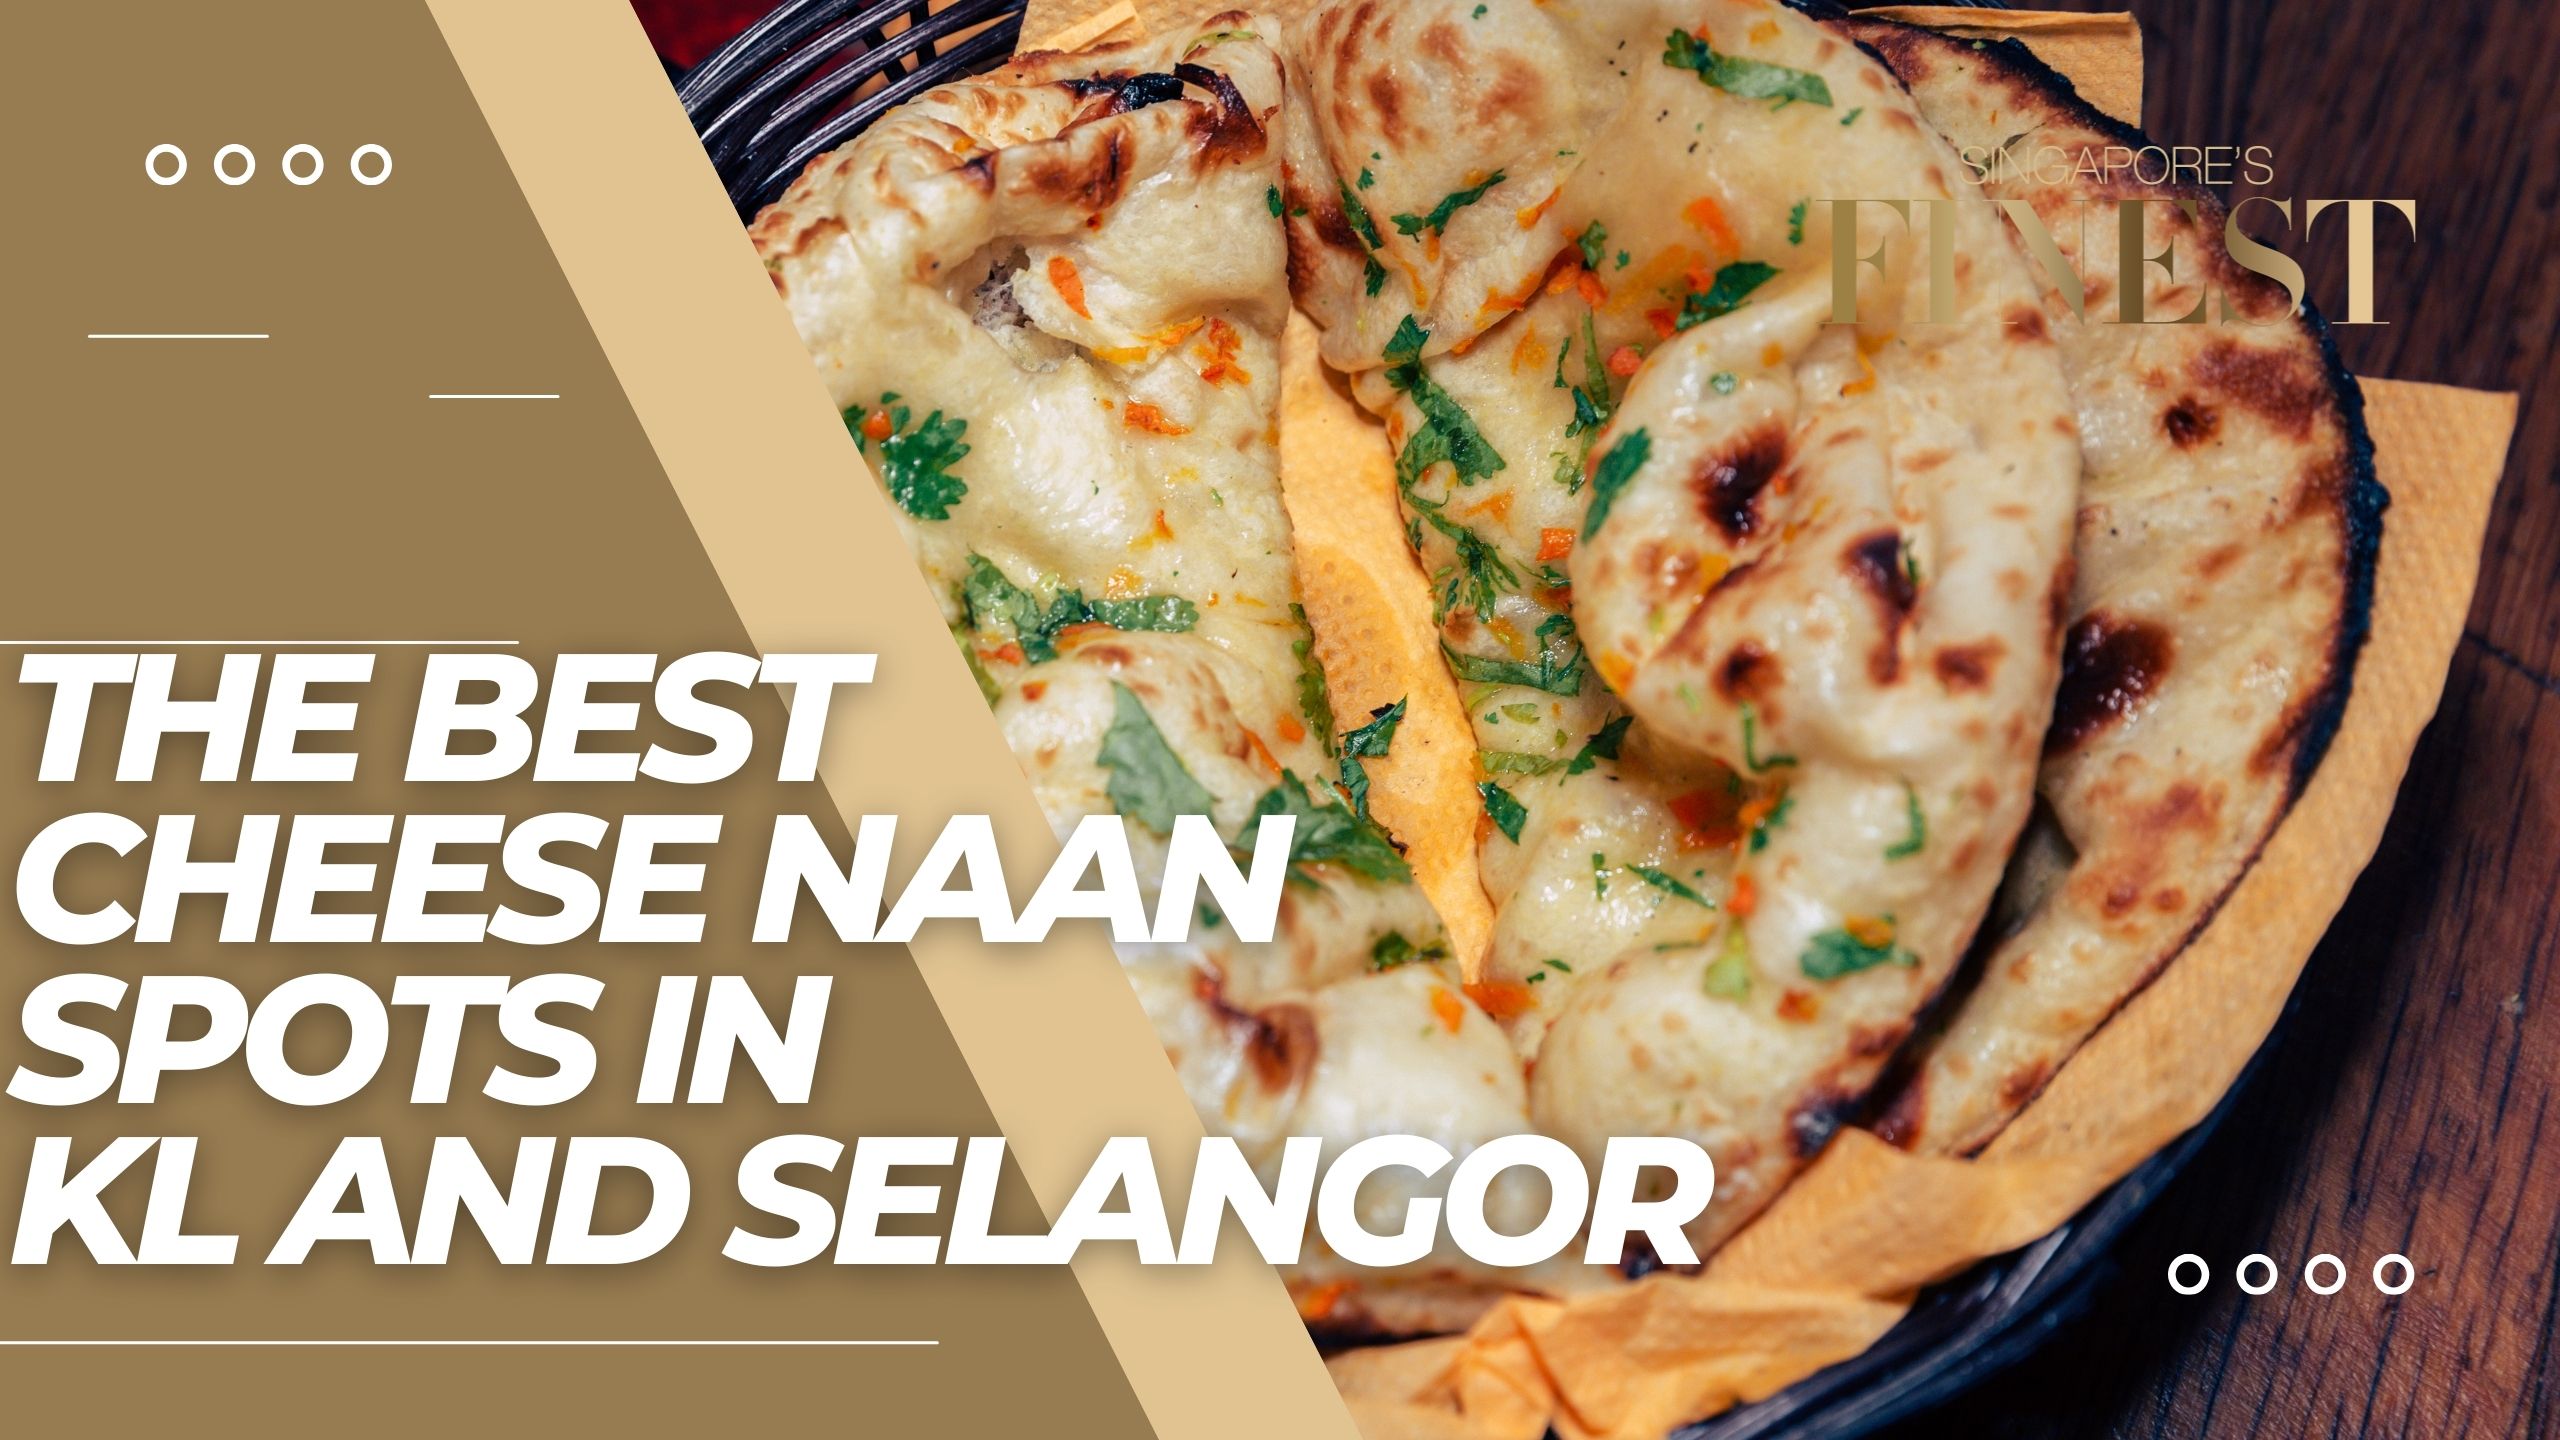 The Finest Cheese Naan Spots in KL and Selangor